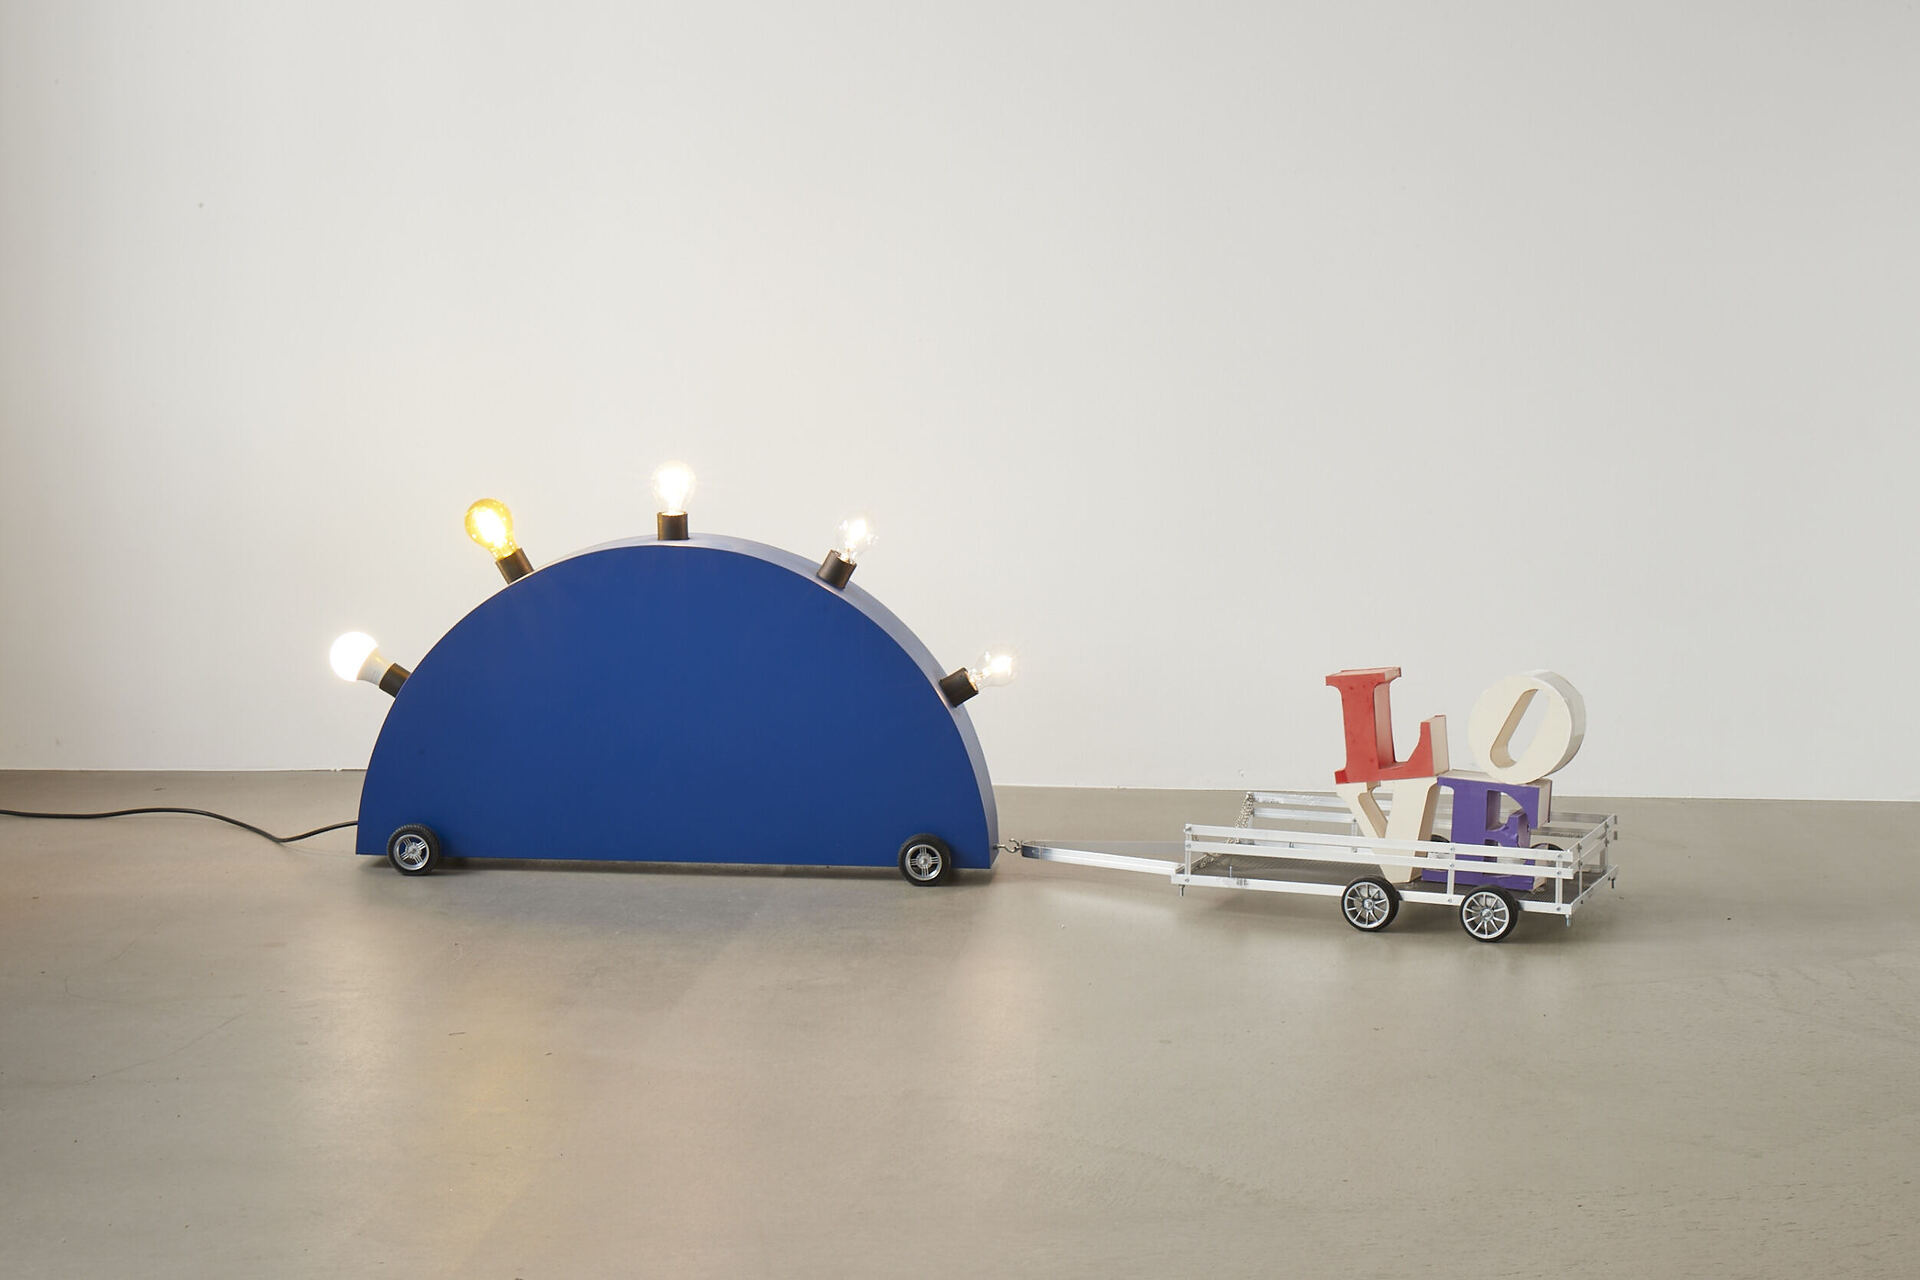 Frieder Haller, Memphis Blues (after Martine Bedin) IV, 2021 Wood, wire, board, electrical wiring, two light bulbs and model car wheels 51 × 158 × 33 cm / 20 × 62.2 × 12.9 inches